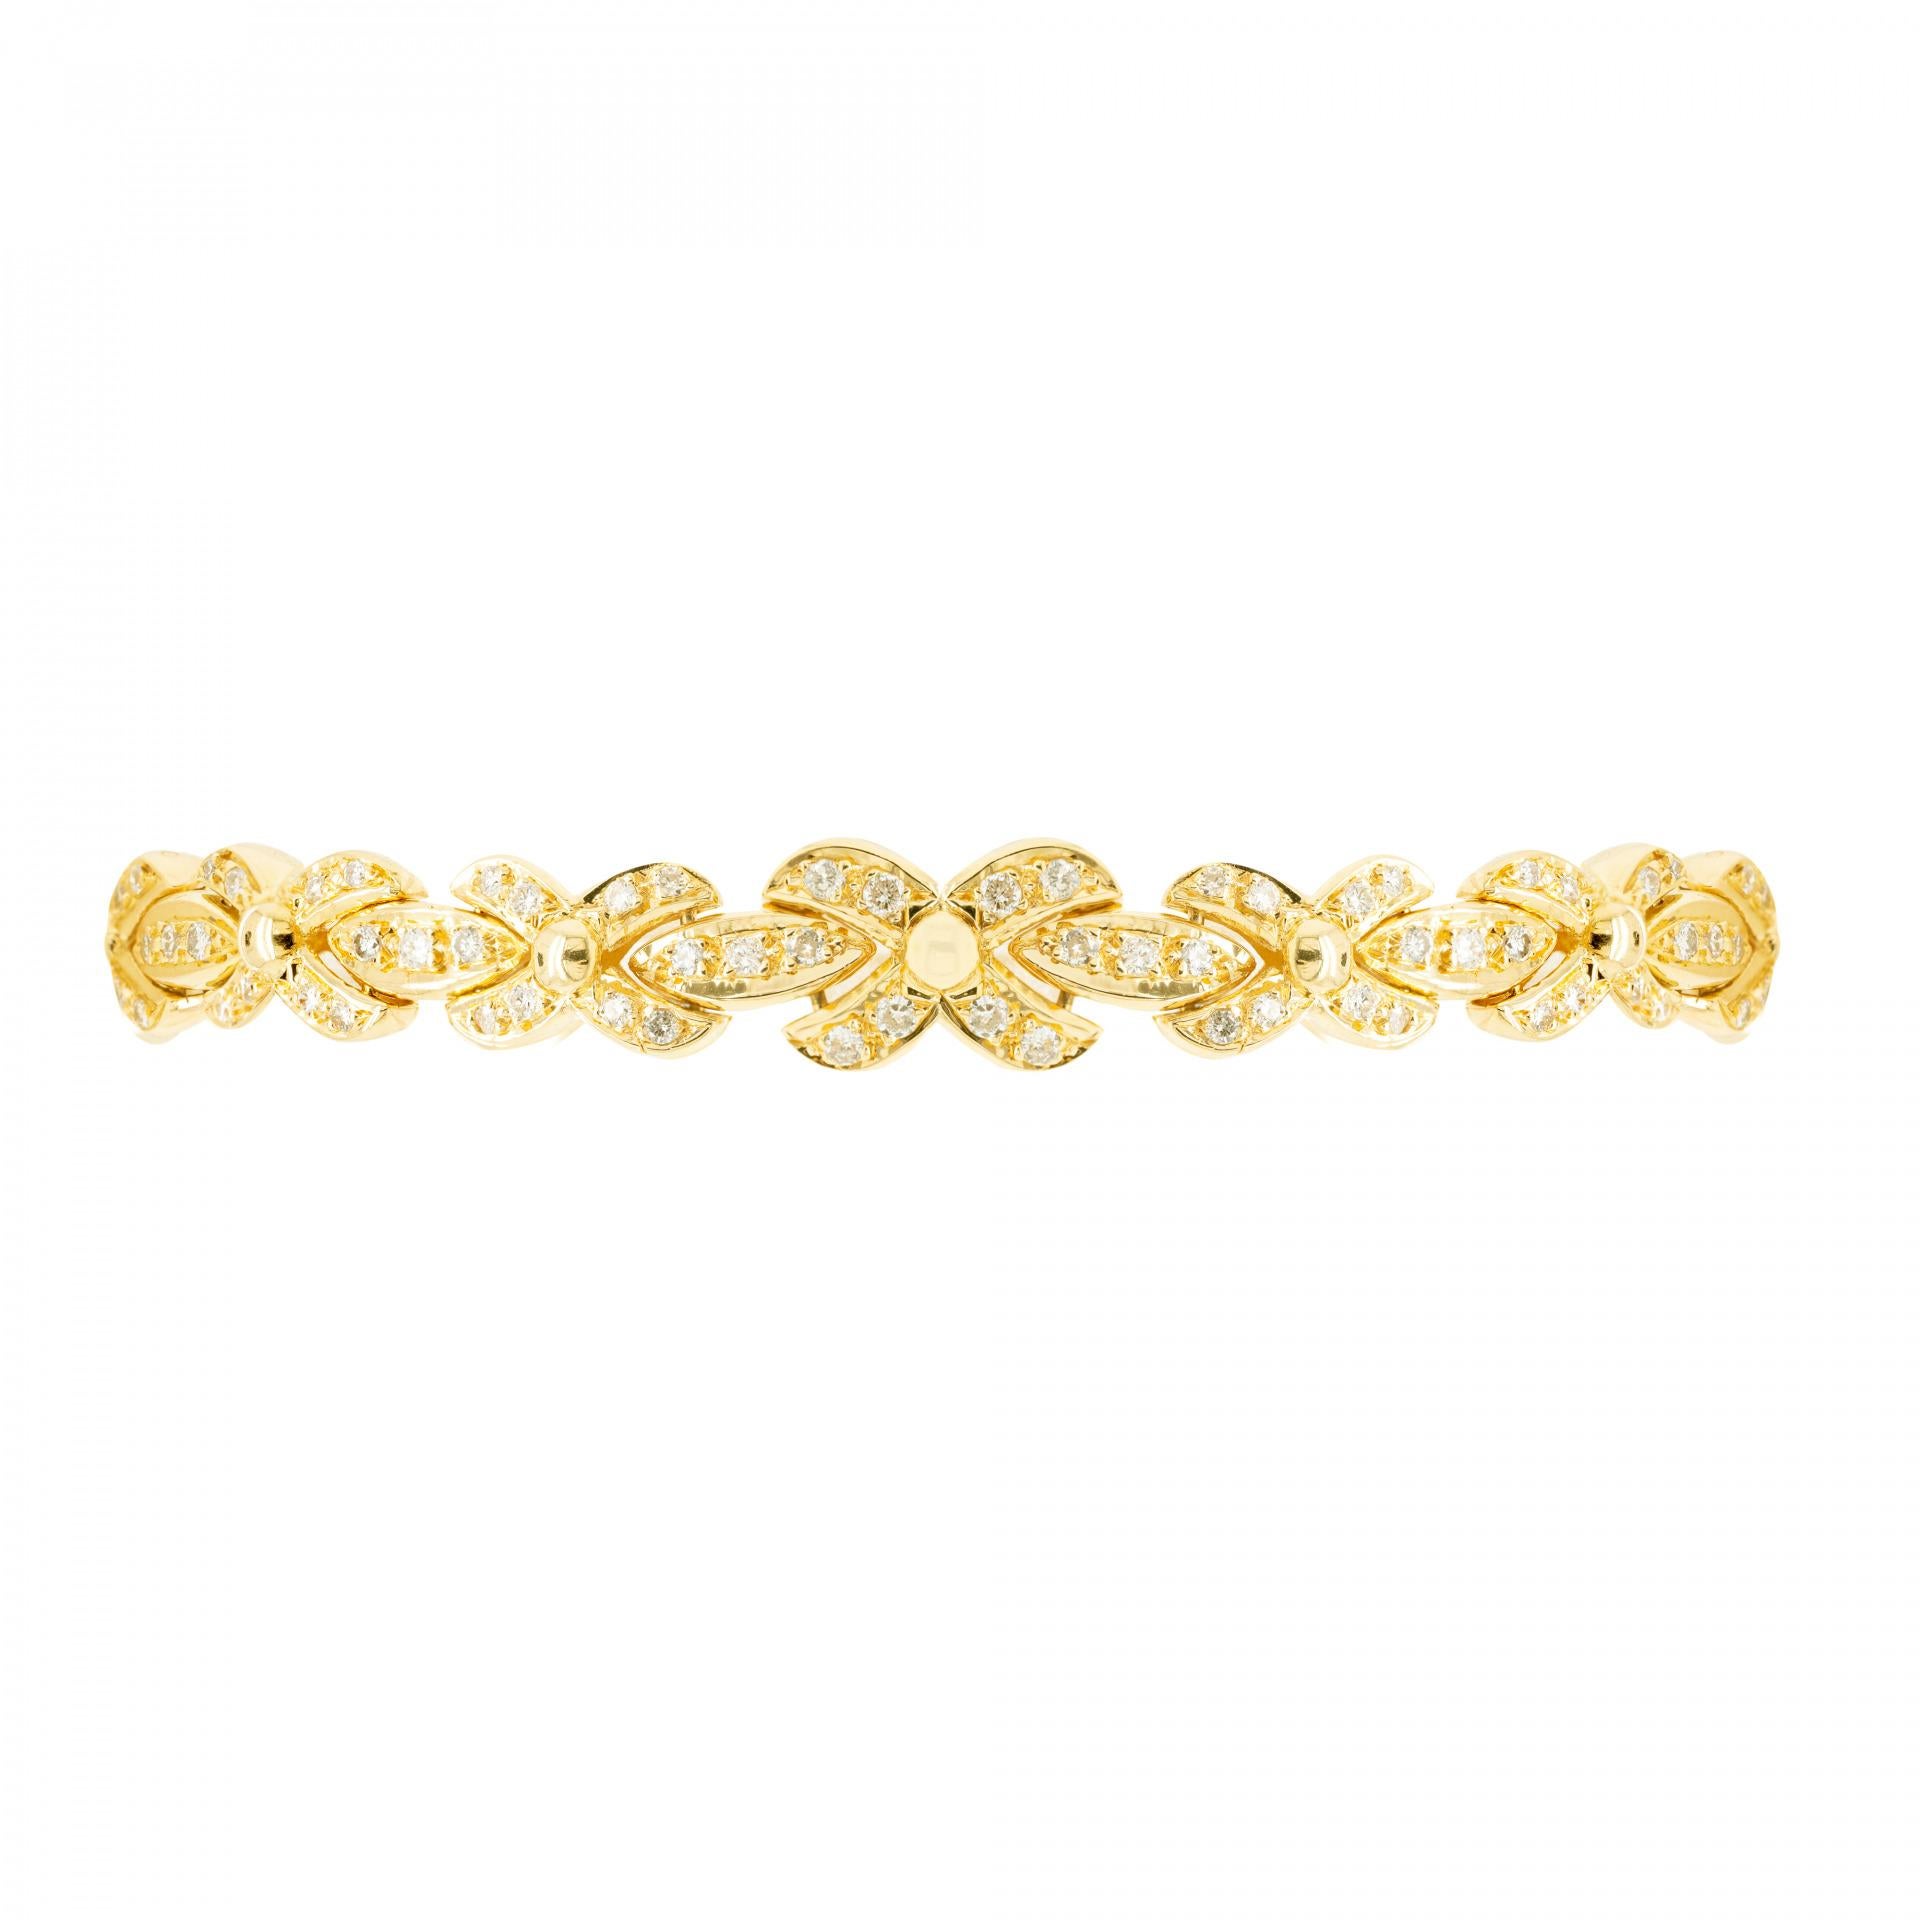 This wonderful 18 carat yellow gold bracelet is designed with alternating 